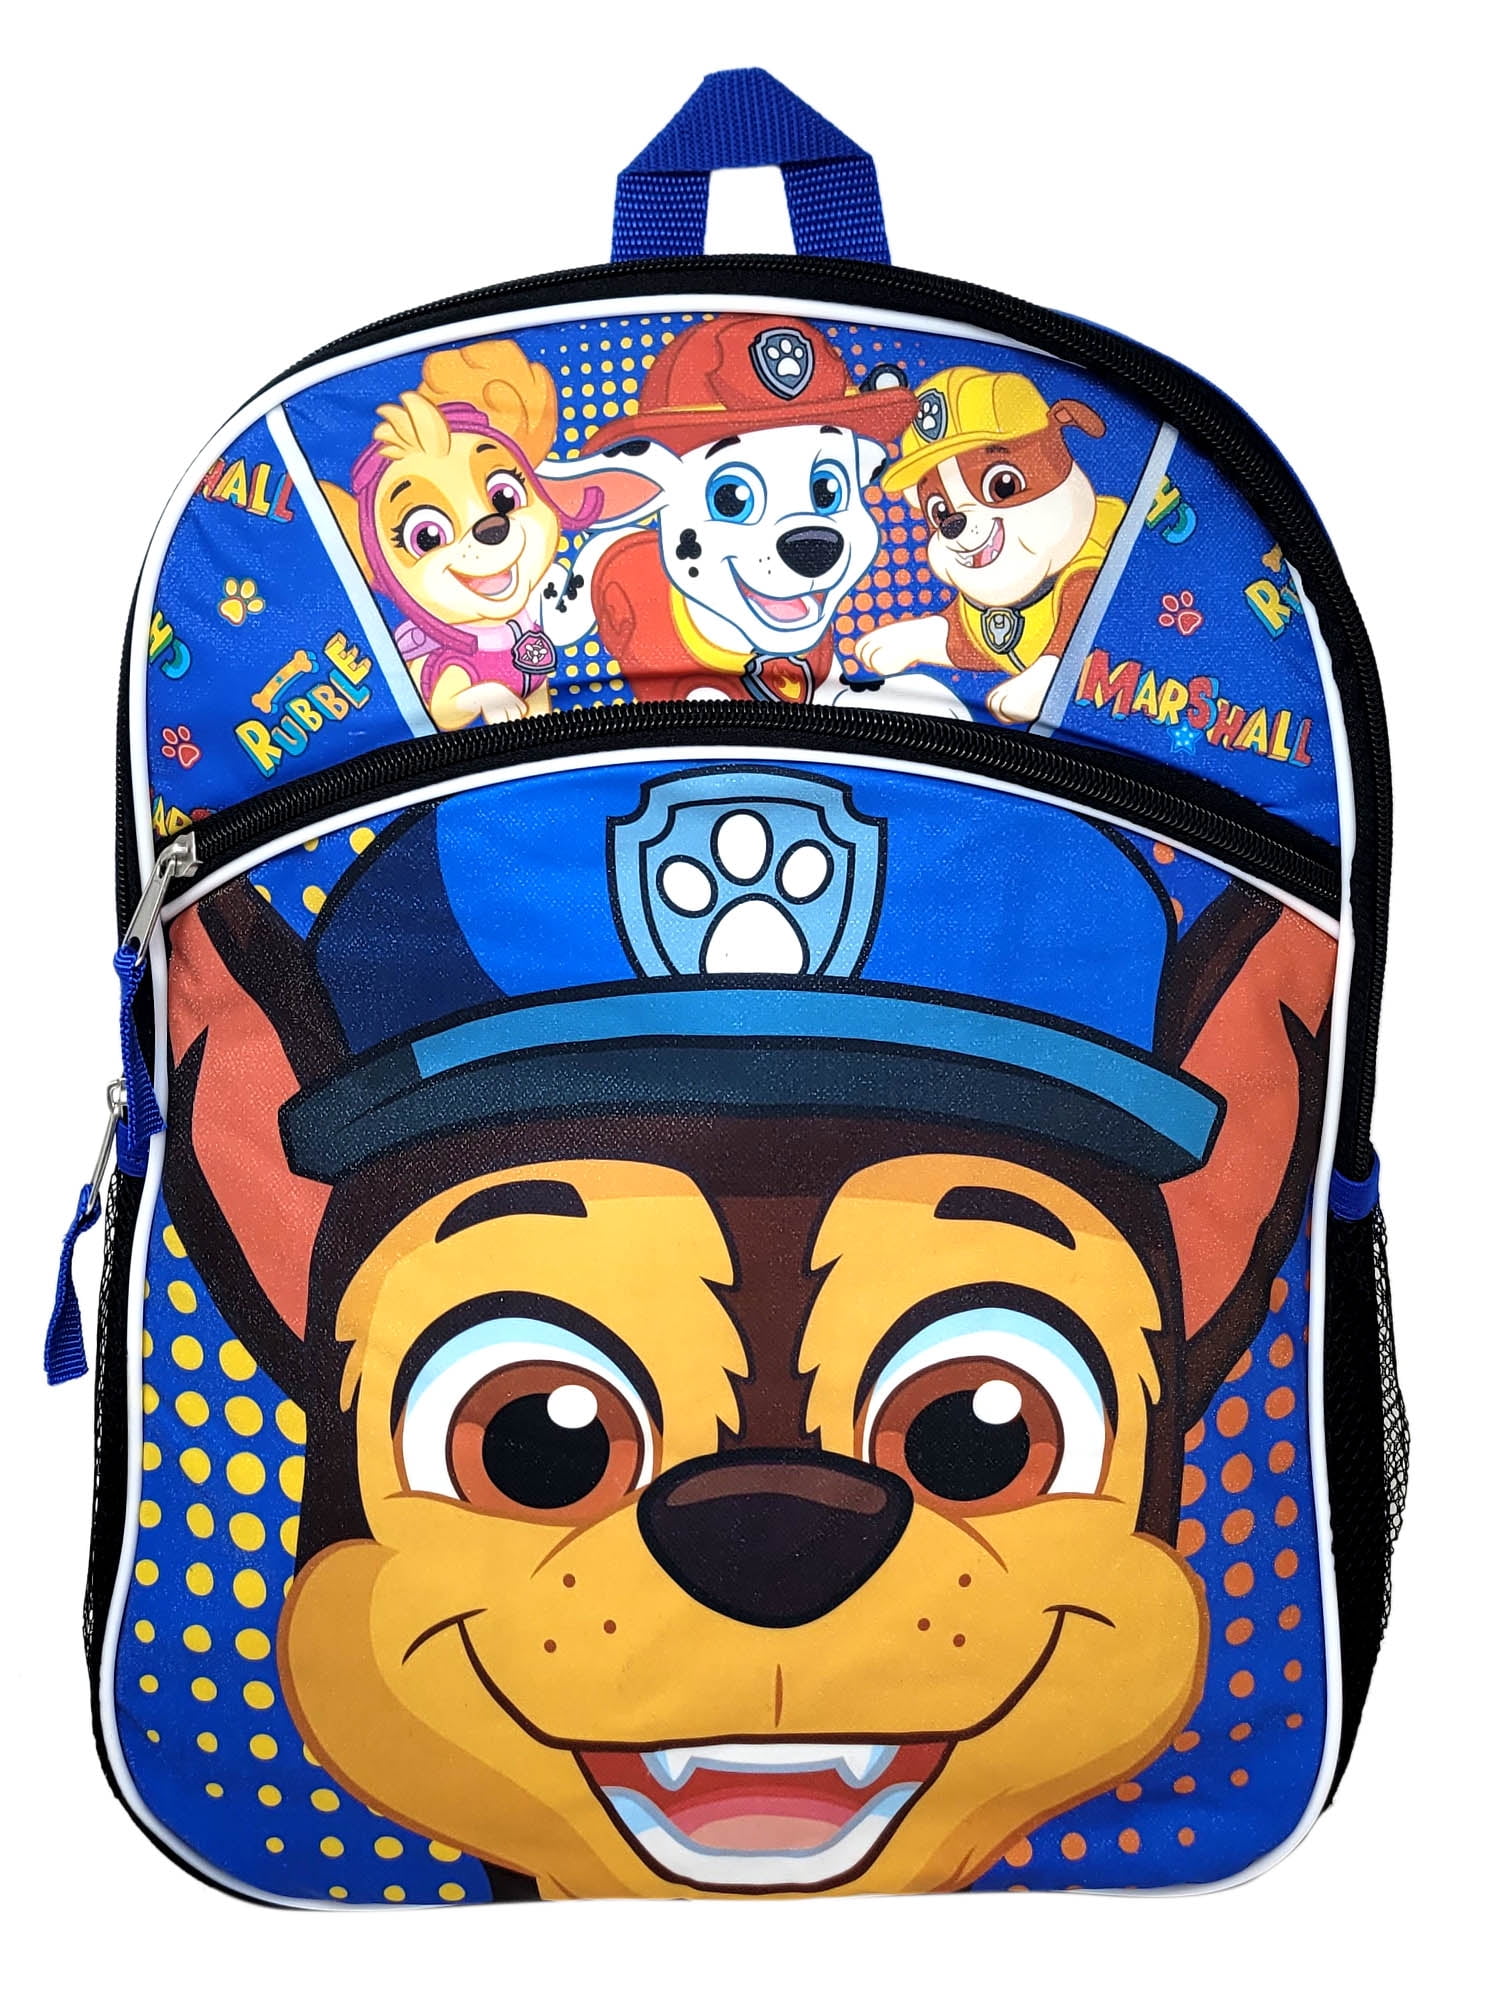 PAW PATROL ROLLING TRAVEL BAG WITH HANDLE SUITCASE SKYE CHASE ZUMA SHIP EVERYDAY 